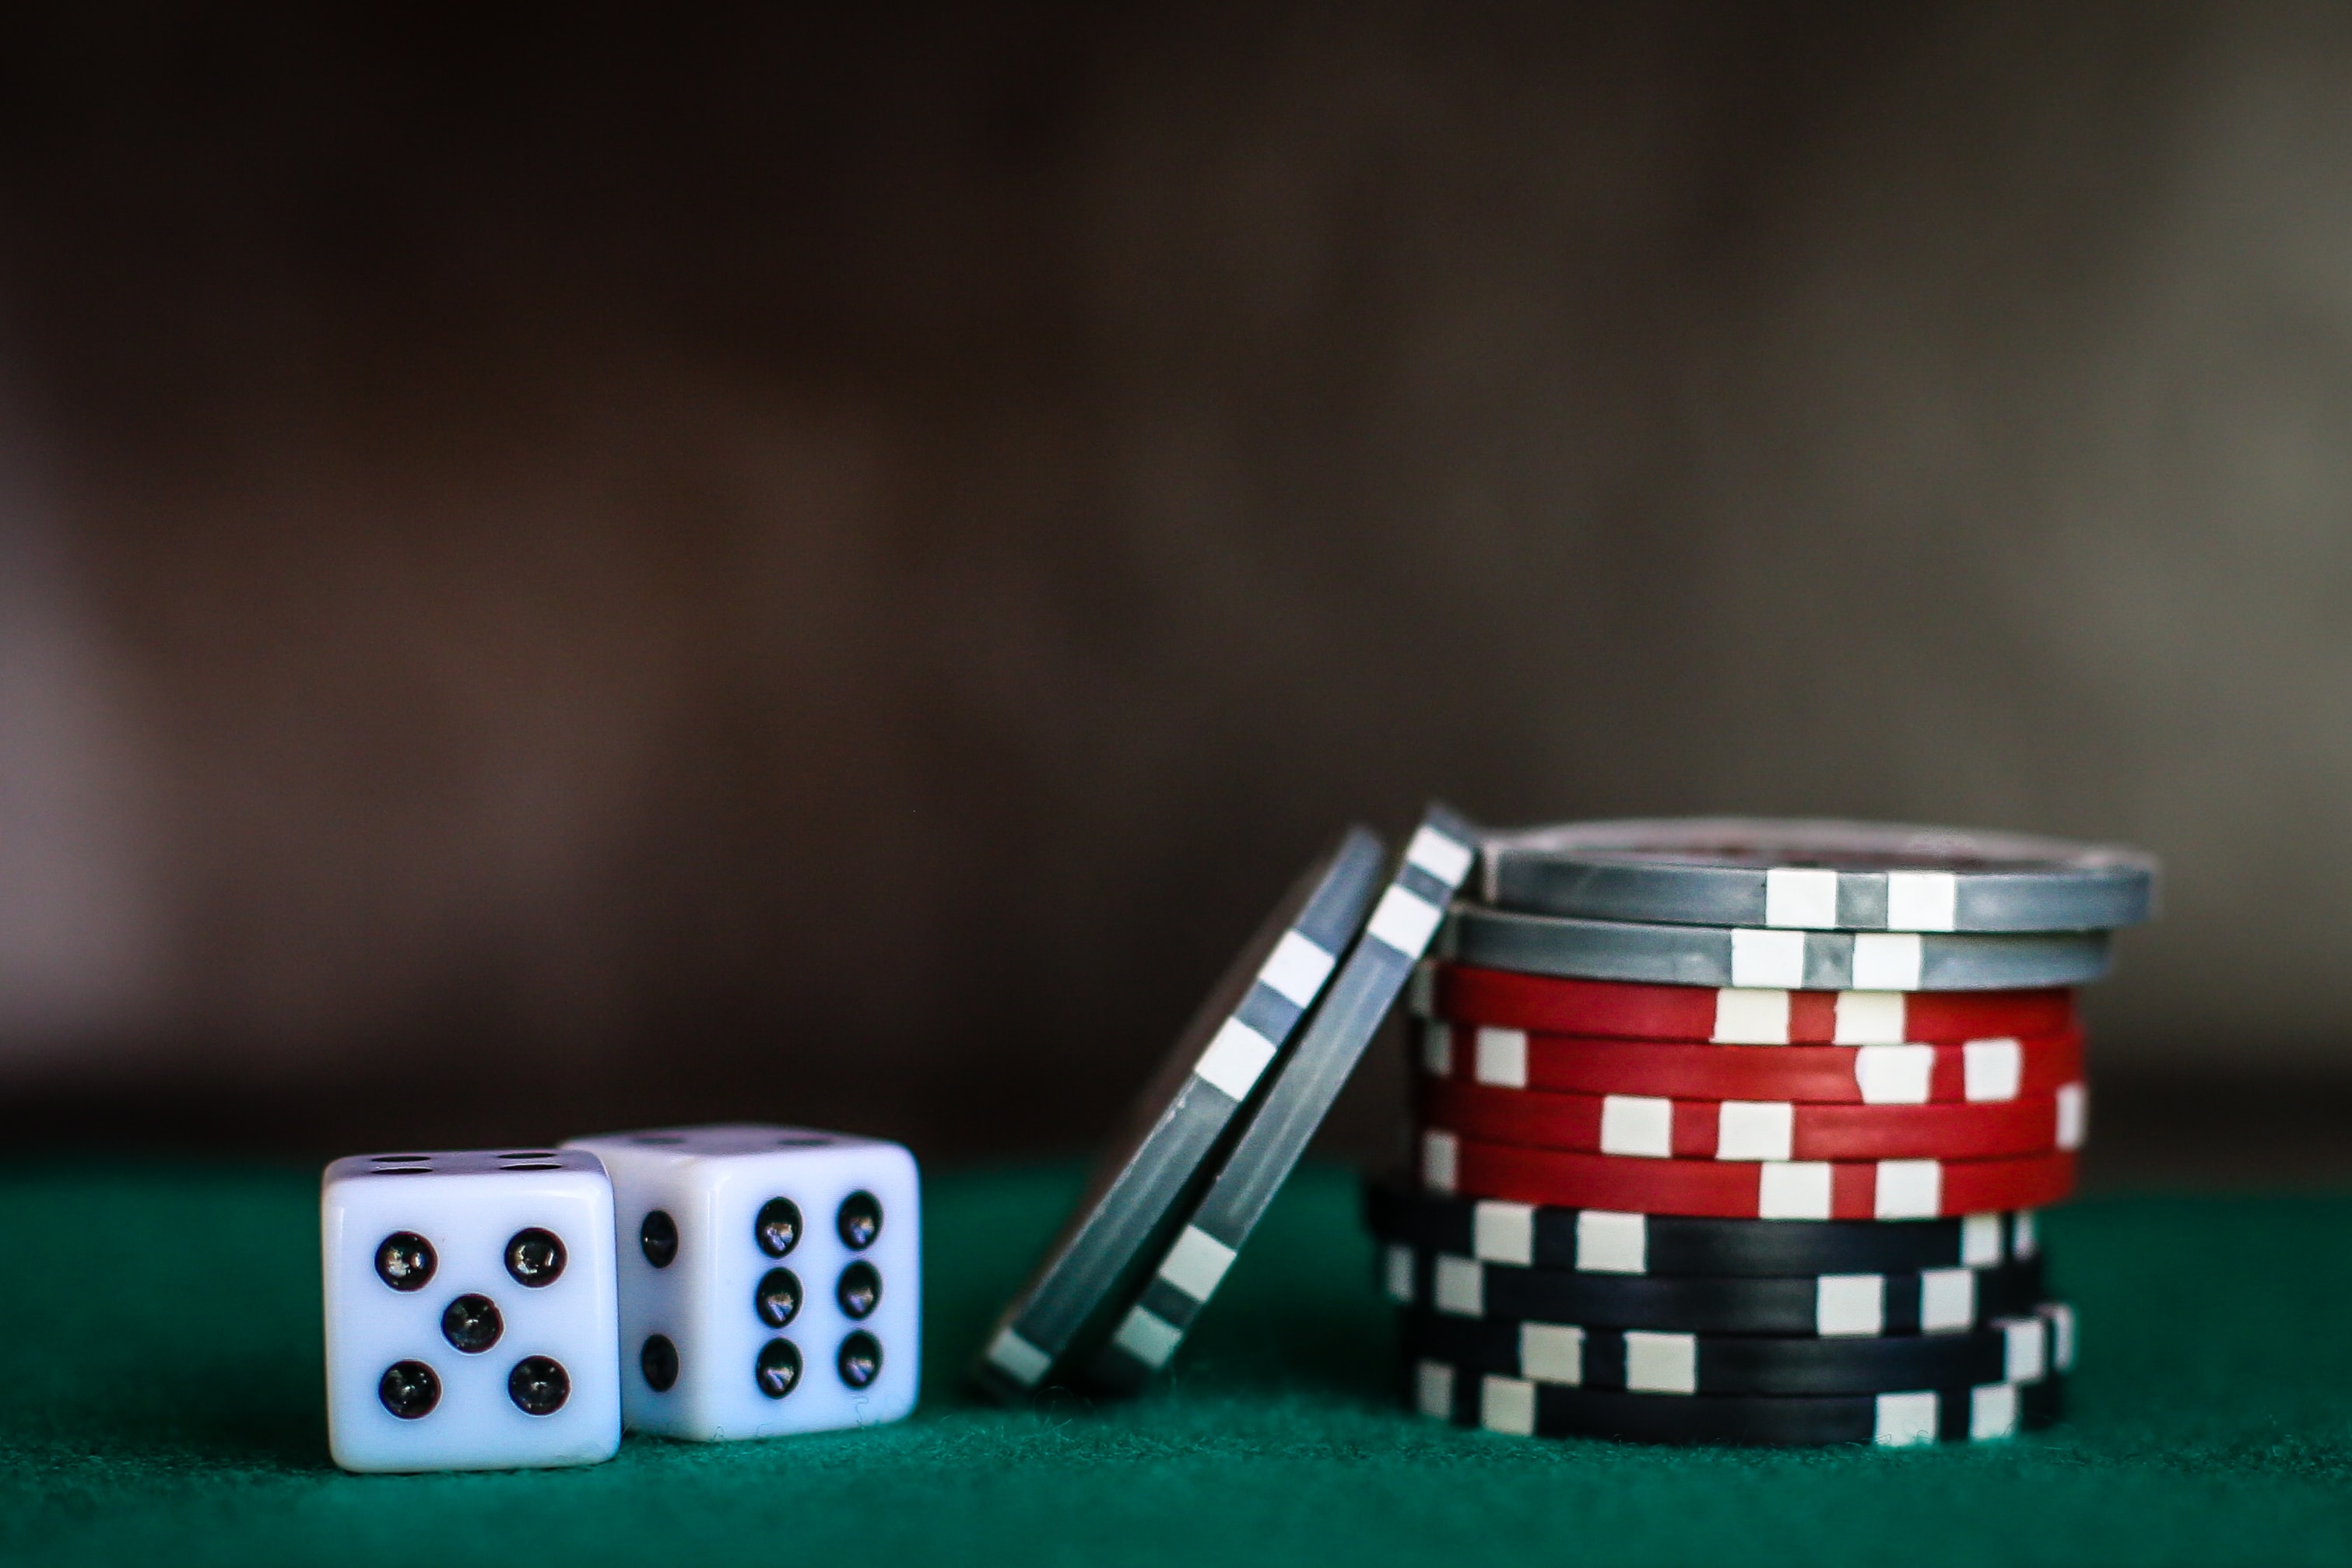 Raegan Murphy and colleagues publish their findings on the predictors of suicide attempts in male UK gamblers seeking residential treatment